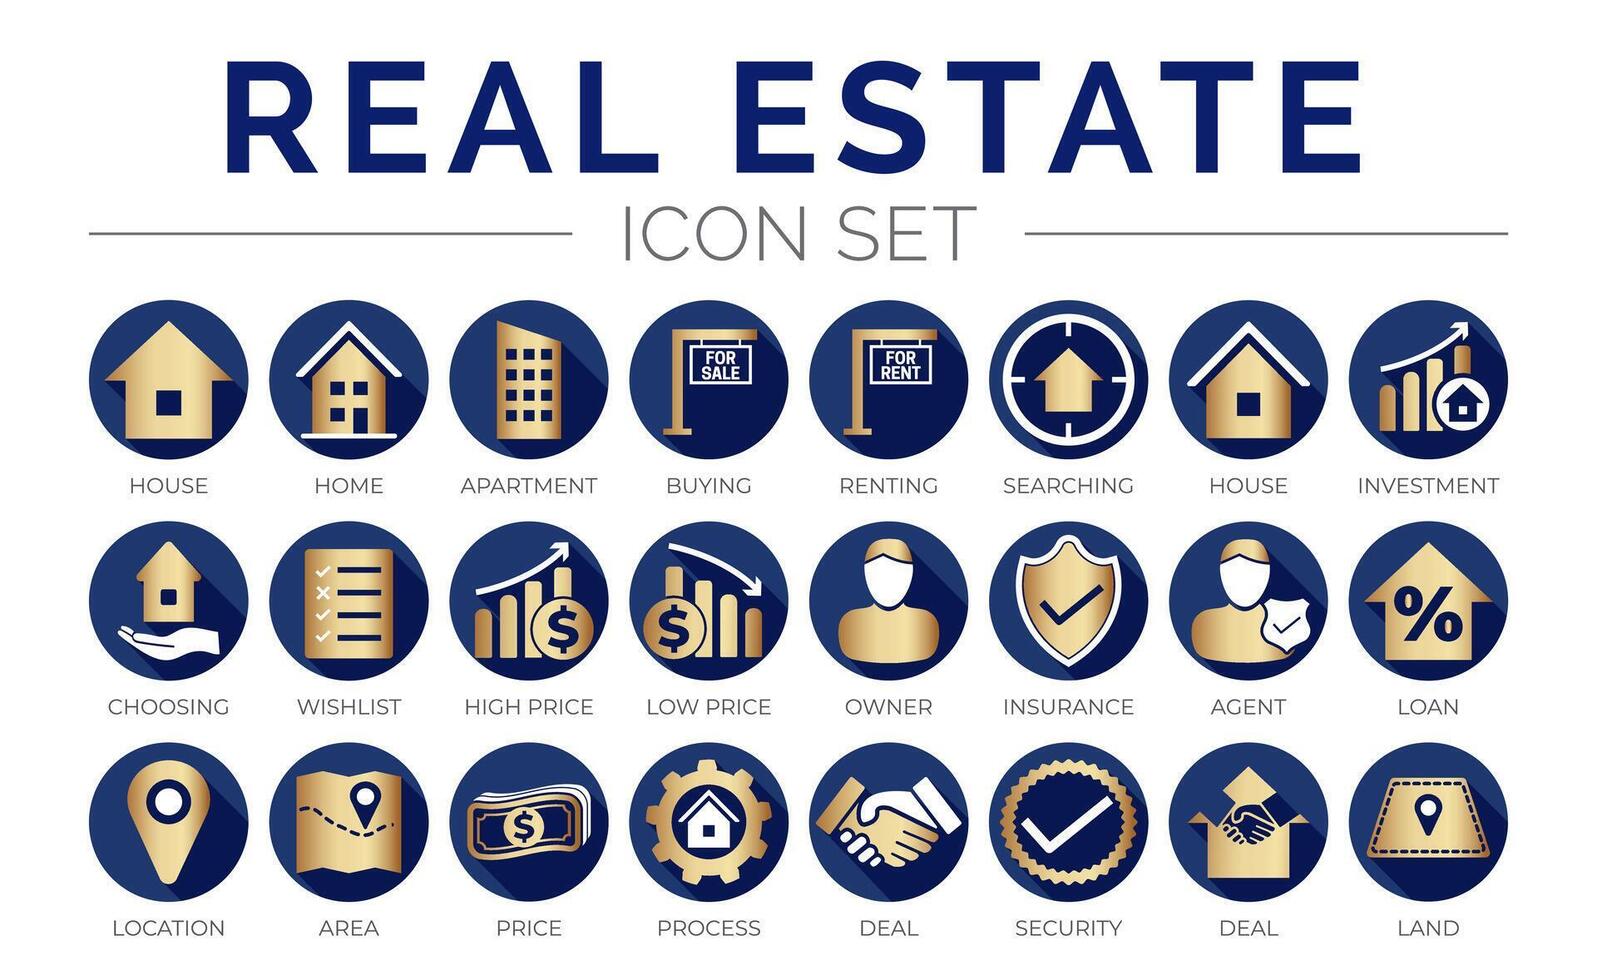 Gold Blue Real Estate Round Icon Set of Home, House, Investment, Choosing, Wishlist, Low High Price, Owner, Insurance, Agent, Loan, Location, Are, Price, Process, Deal, Land, Security, Icons. vector